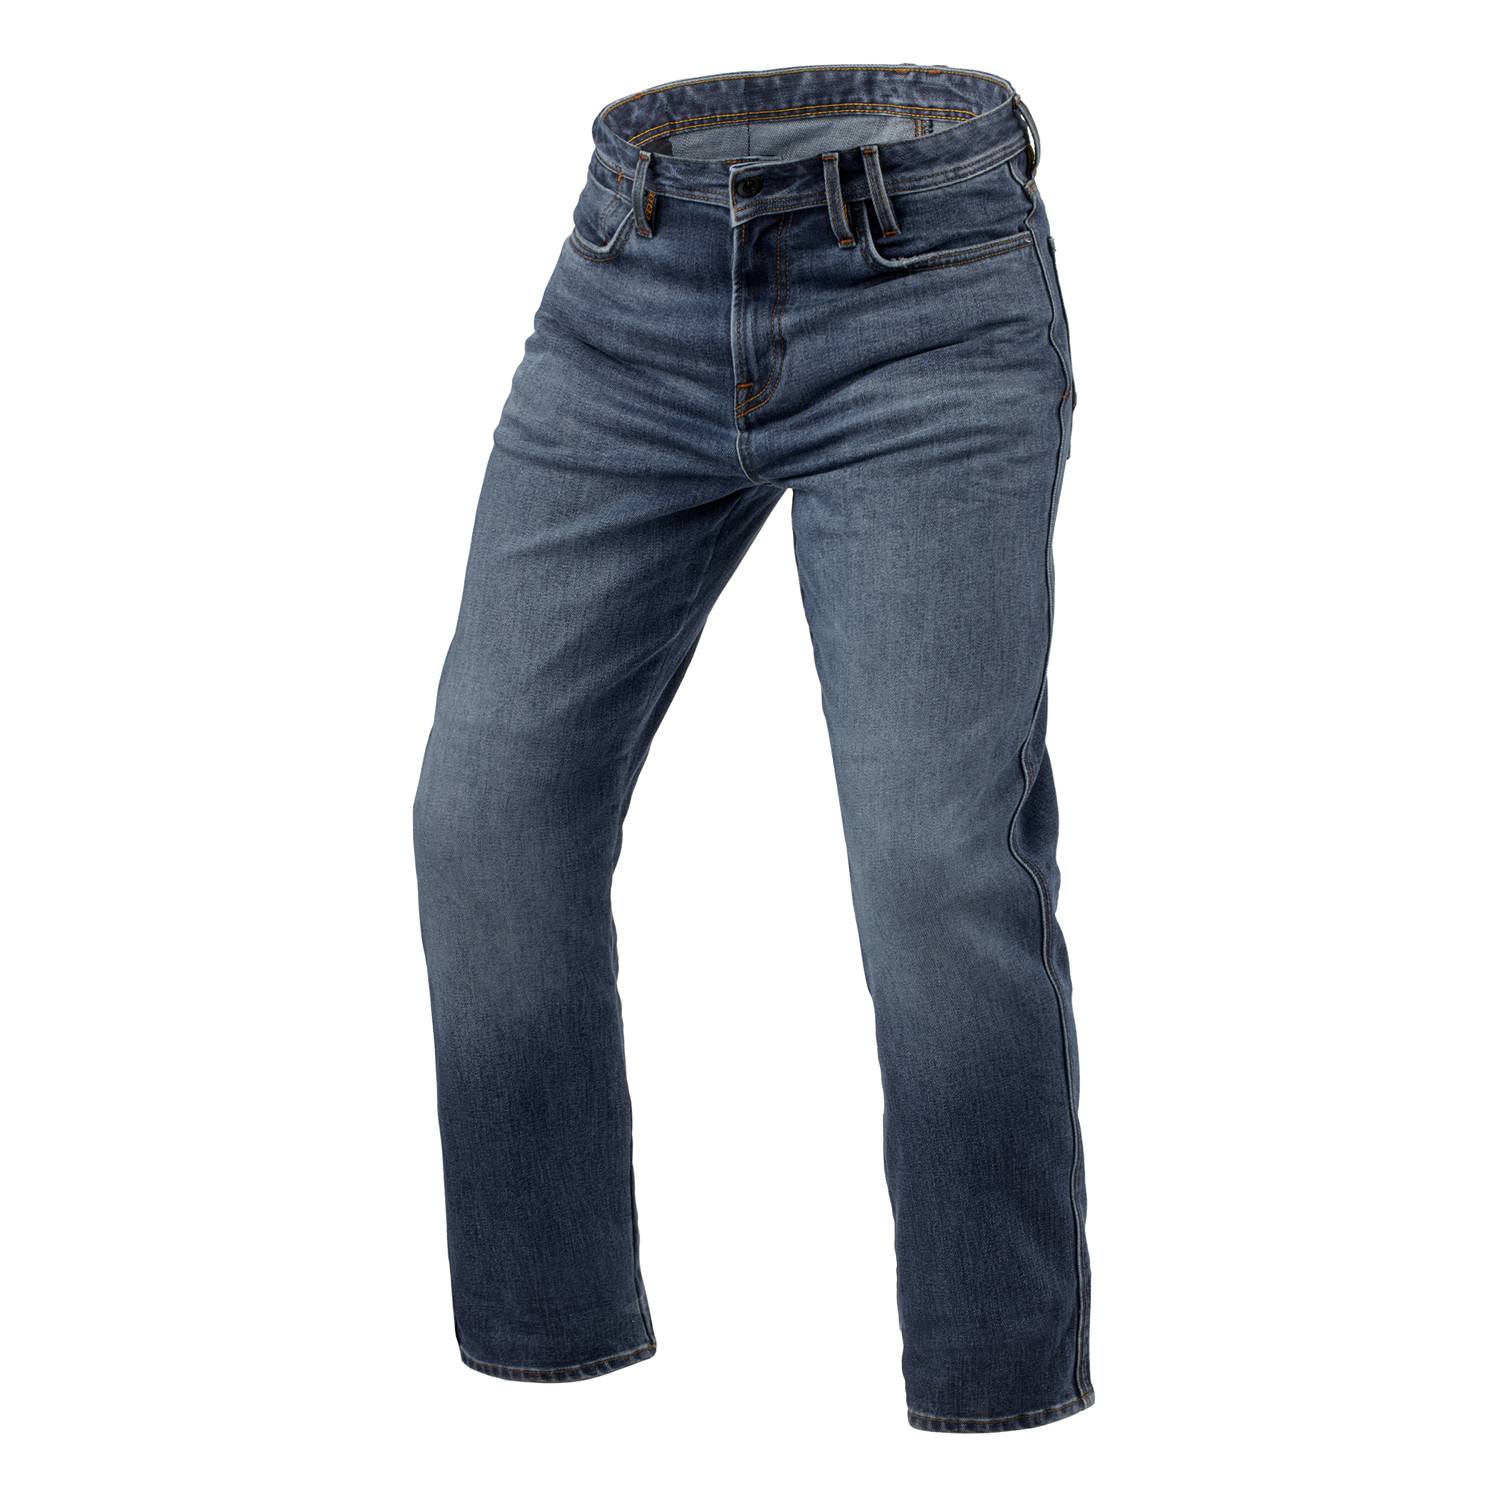 Image of EU REV'IT! Jeans Lombard 3 RF Medium Blue Stone L36 Motorcycle Jeans Taille L36/W30